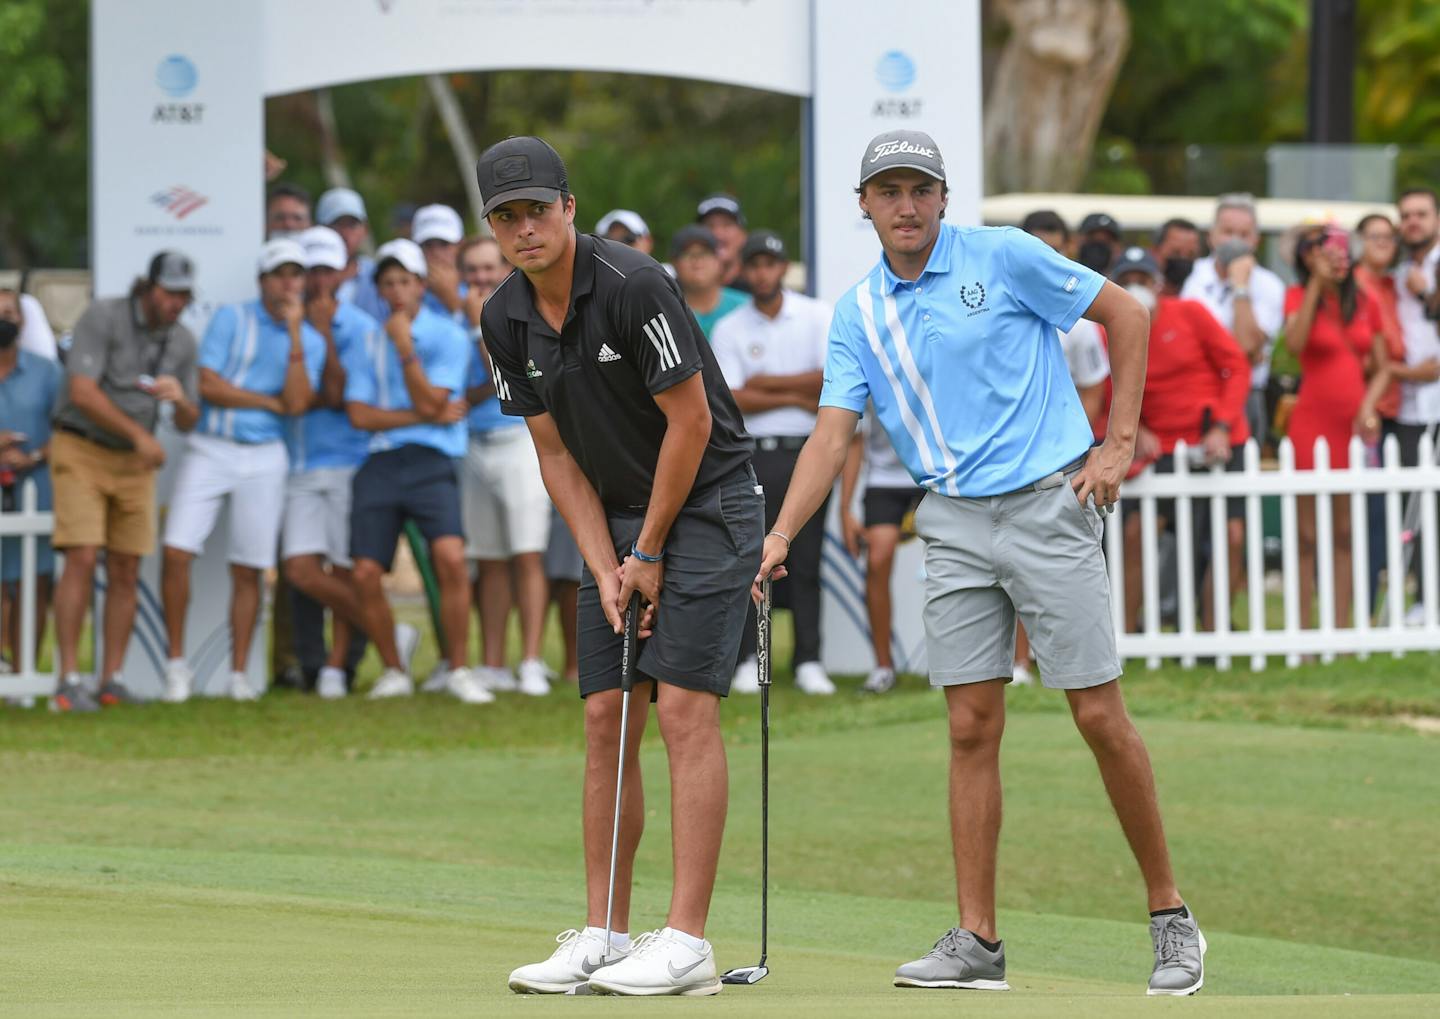 La Romana, DOMINICAN REPUBLIC: Fred Biondi of Brazil and Vicente Marzilio of Argentina pictured at the 2022 Latin America Amateur Championship at Casa de Campo Resort during Final Round on January 23rd, 2022.